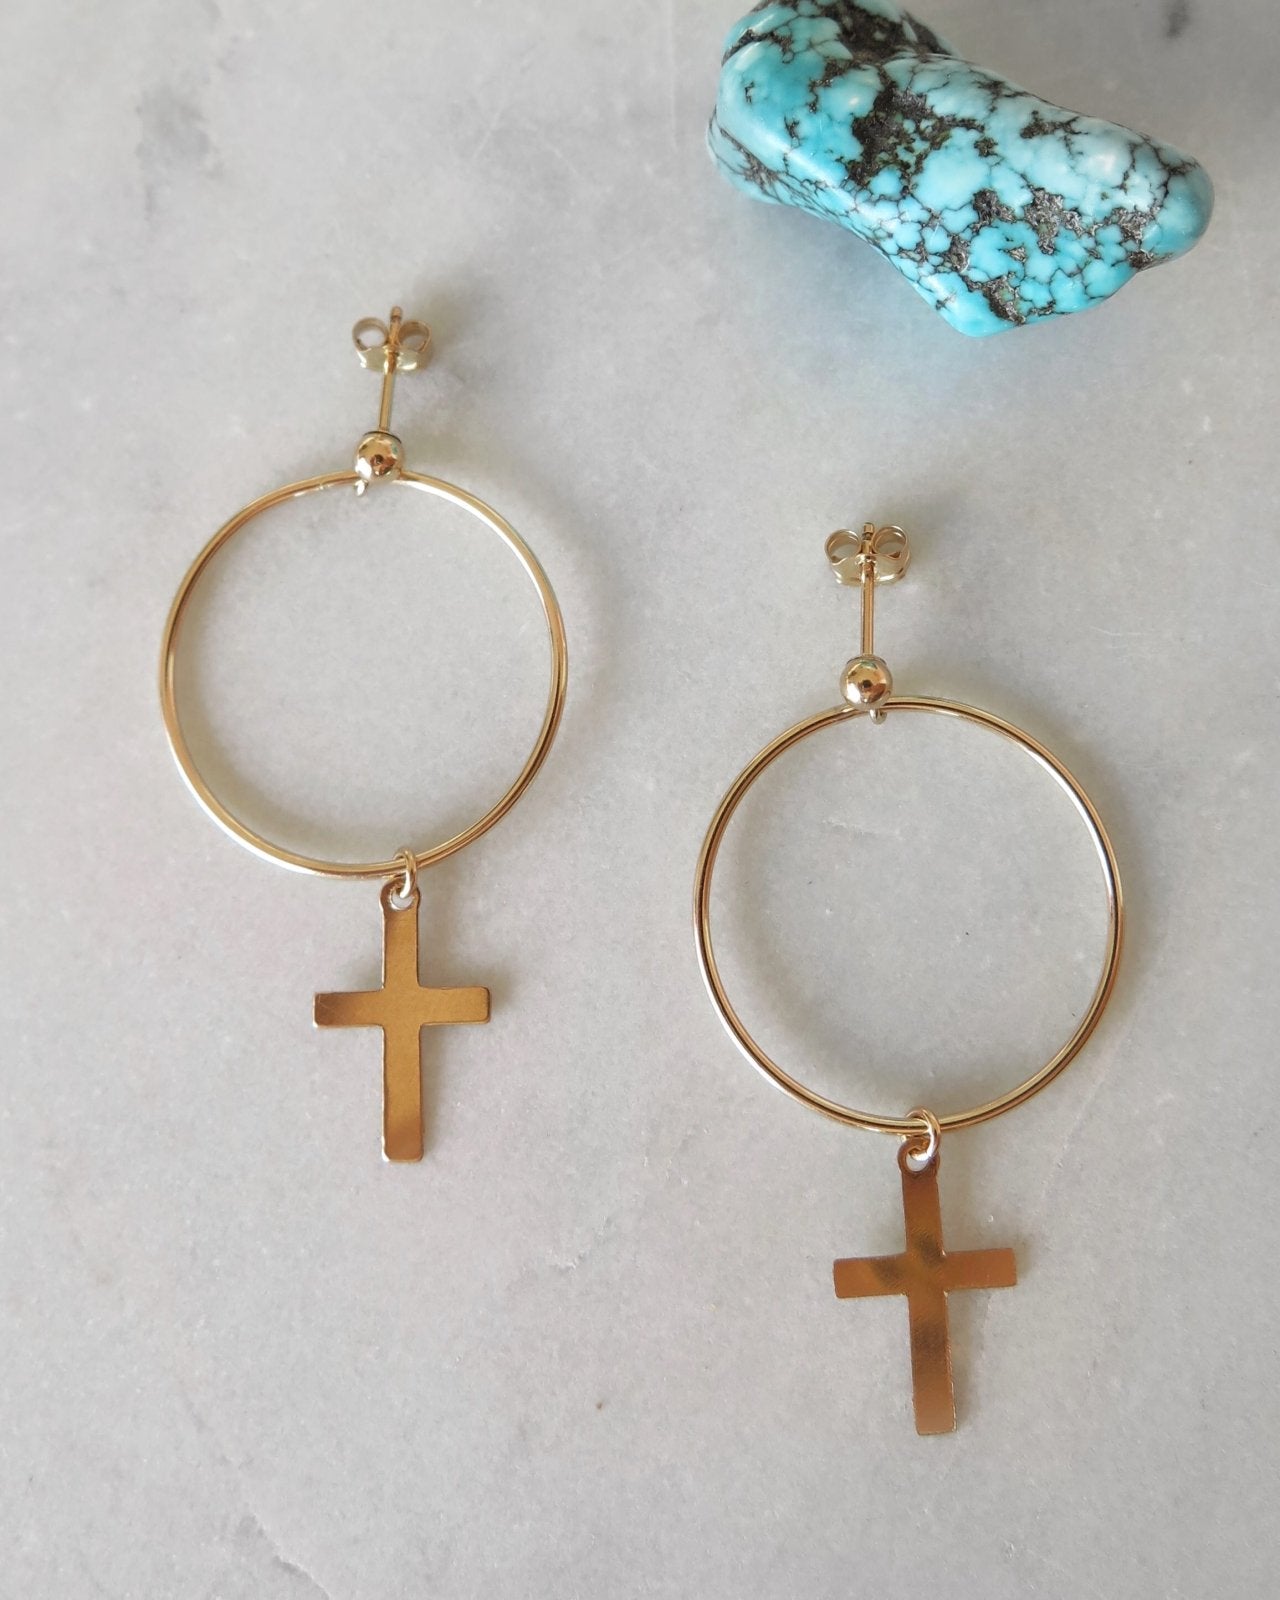 Load image into Gallery viewer, LARGE CIRCLE CROSS EARRINGS - The Littl - 14k Yellow Gold Fill -
